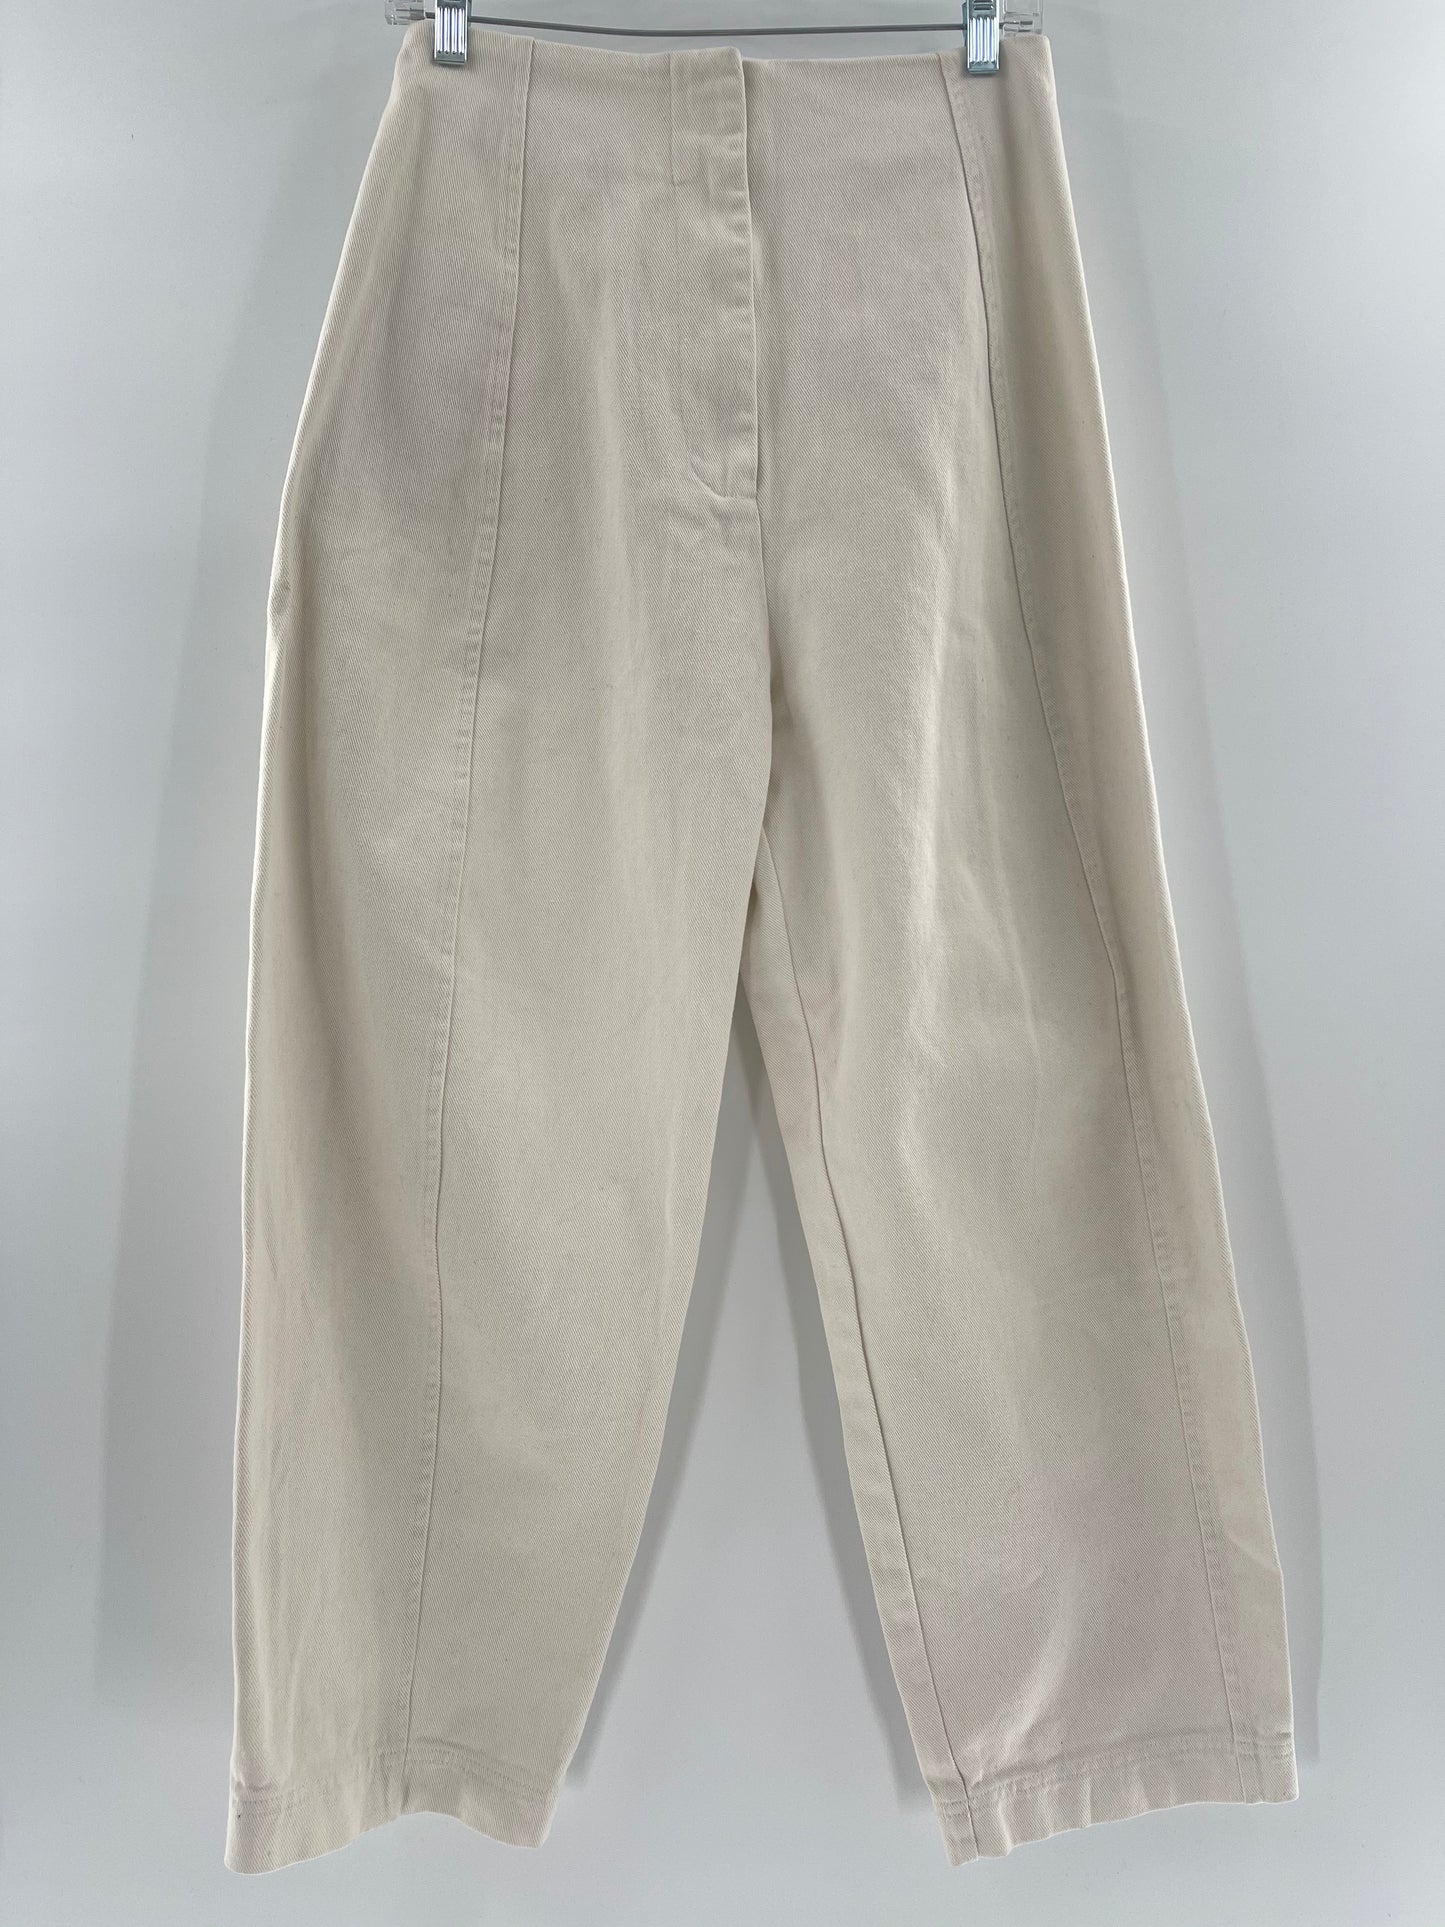 BDG Urban Outfitters Off-White Jeans Pants (Size 26)